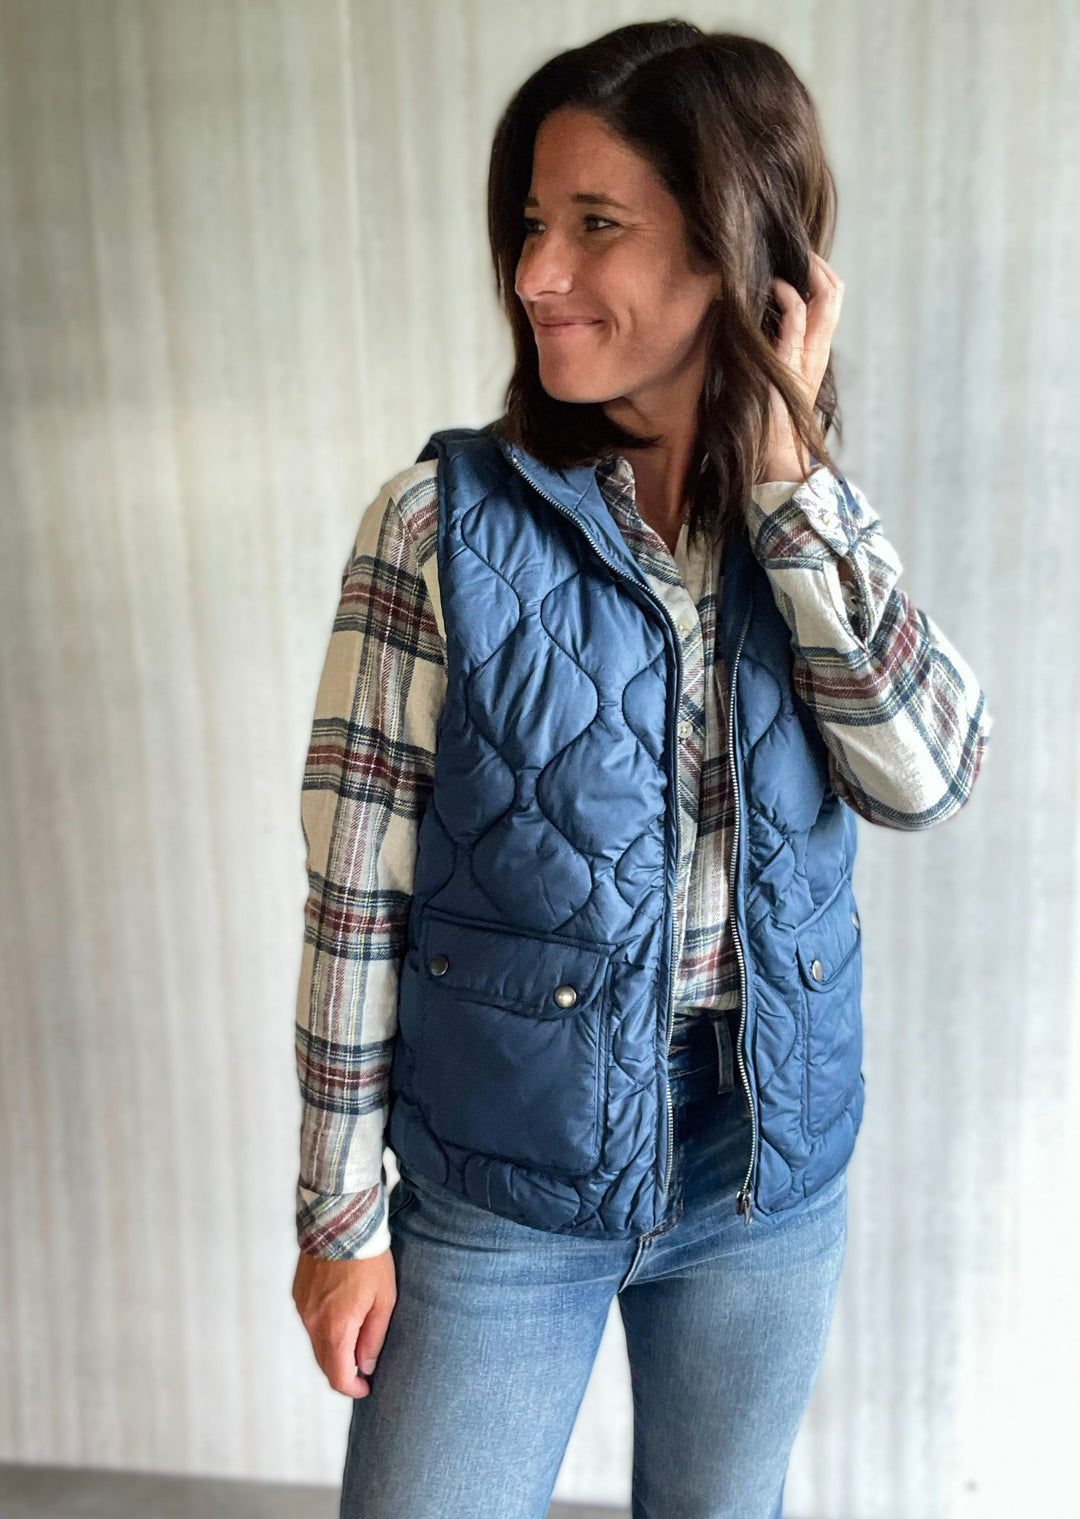 Thread & Supply Blue Vest paired with white, maroon, and blue flannel and jeans. Central Illinoi Women's Clothing Boutique.